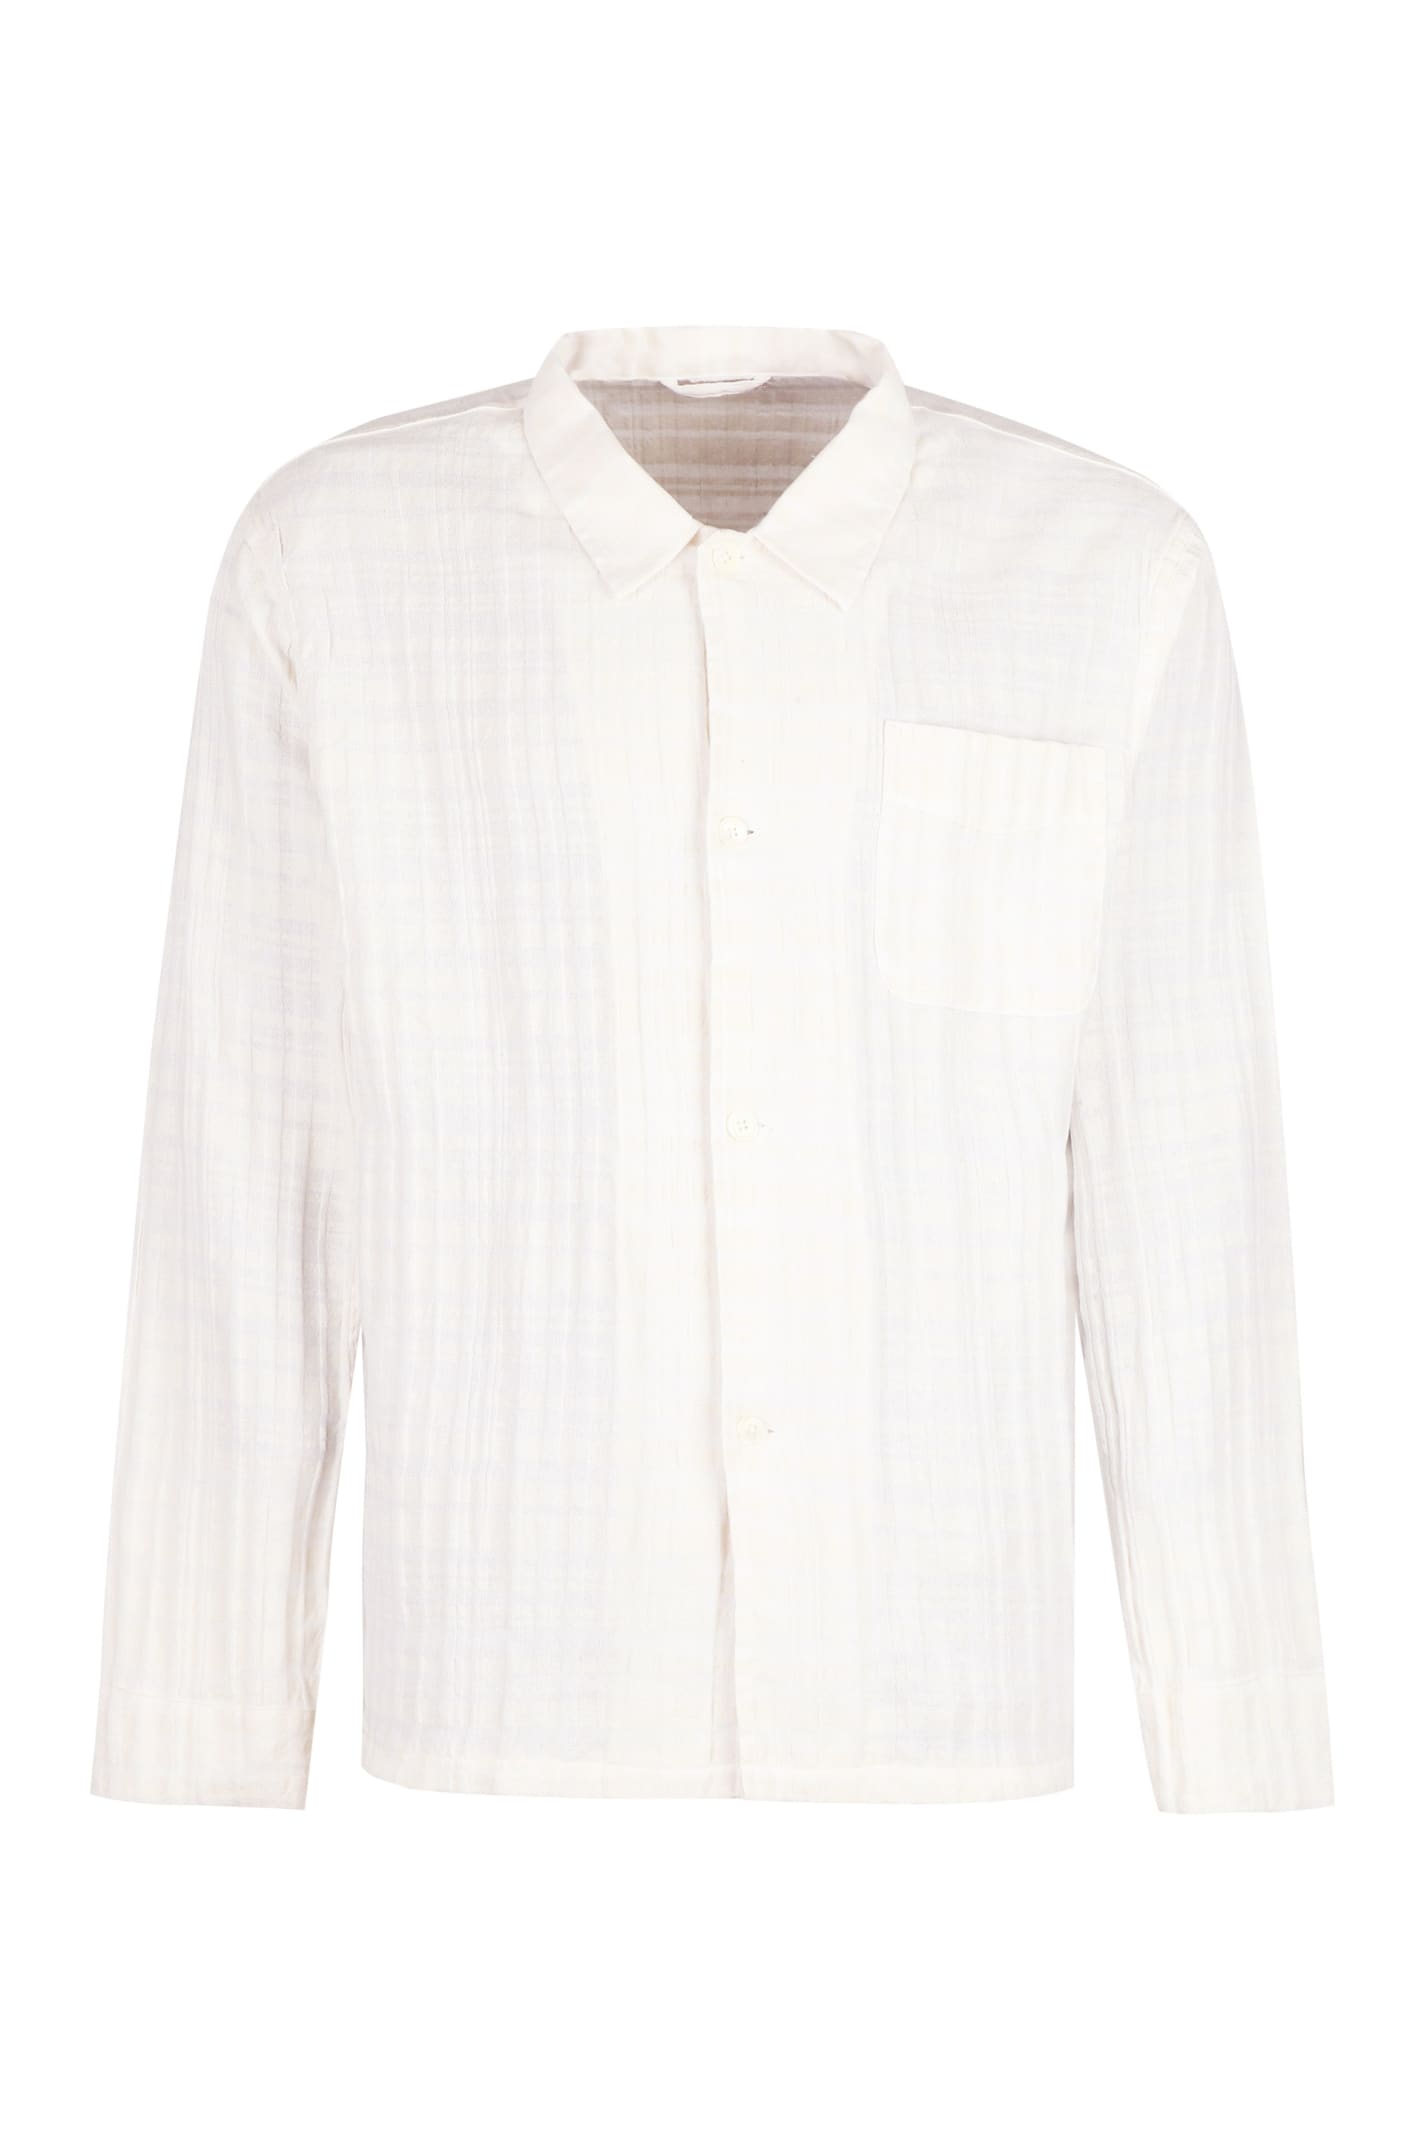 Our Legacy Box Checked Cotton Shirt